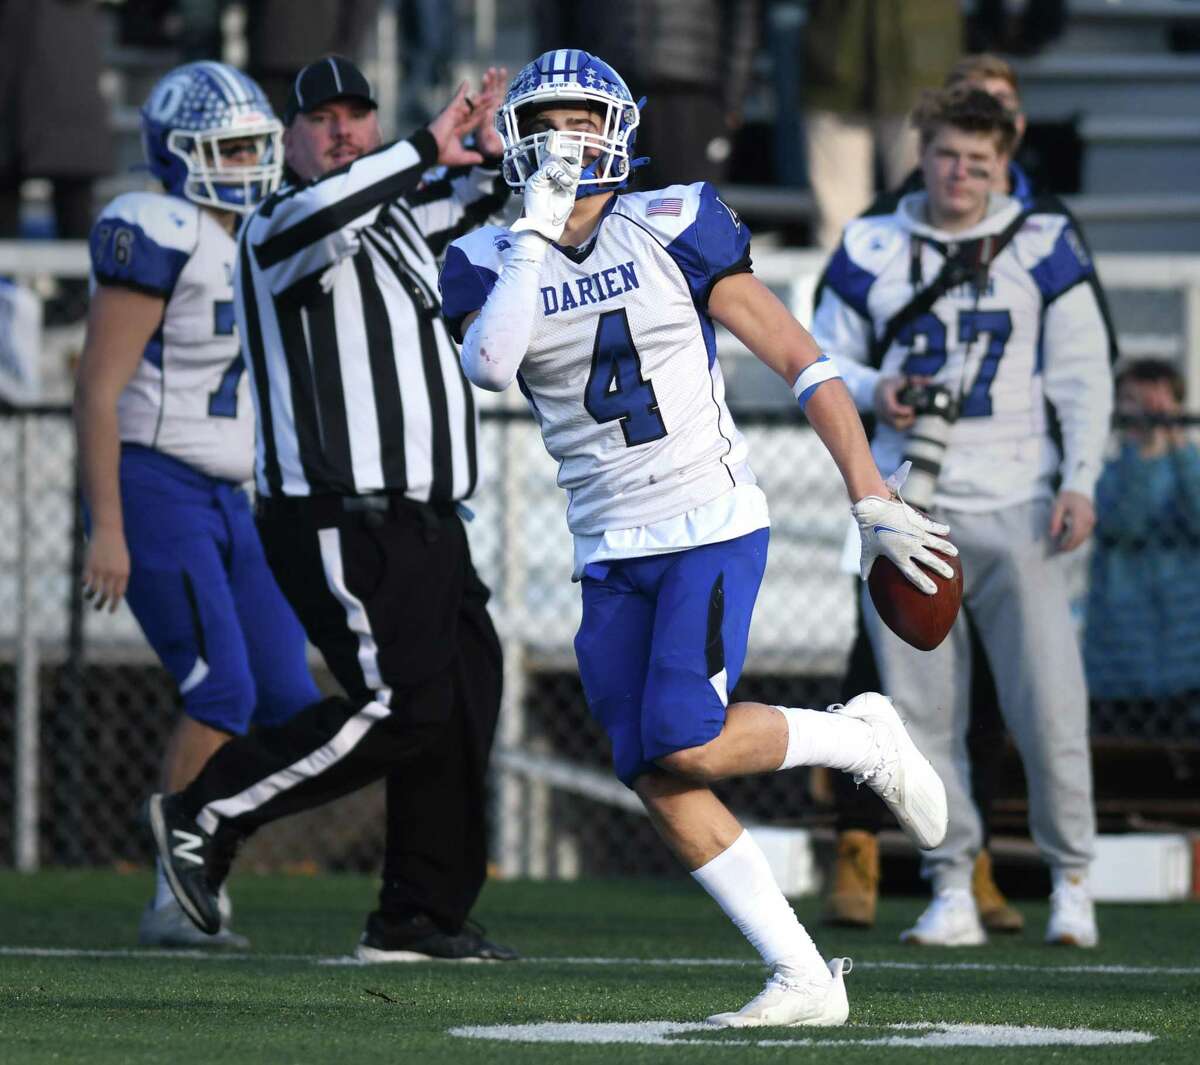 Darien defensive back Joe Cesare (4) celebrates after one of his three interceptions in No. 3 Darien’s 24-10 win over No. 2 New Canaan in the CIAC Class LL football semifinal on Sunday at New Canaan High School.